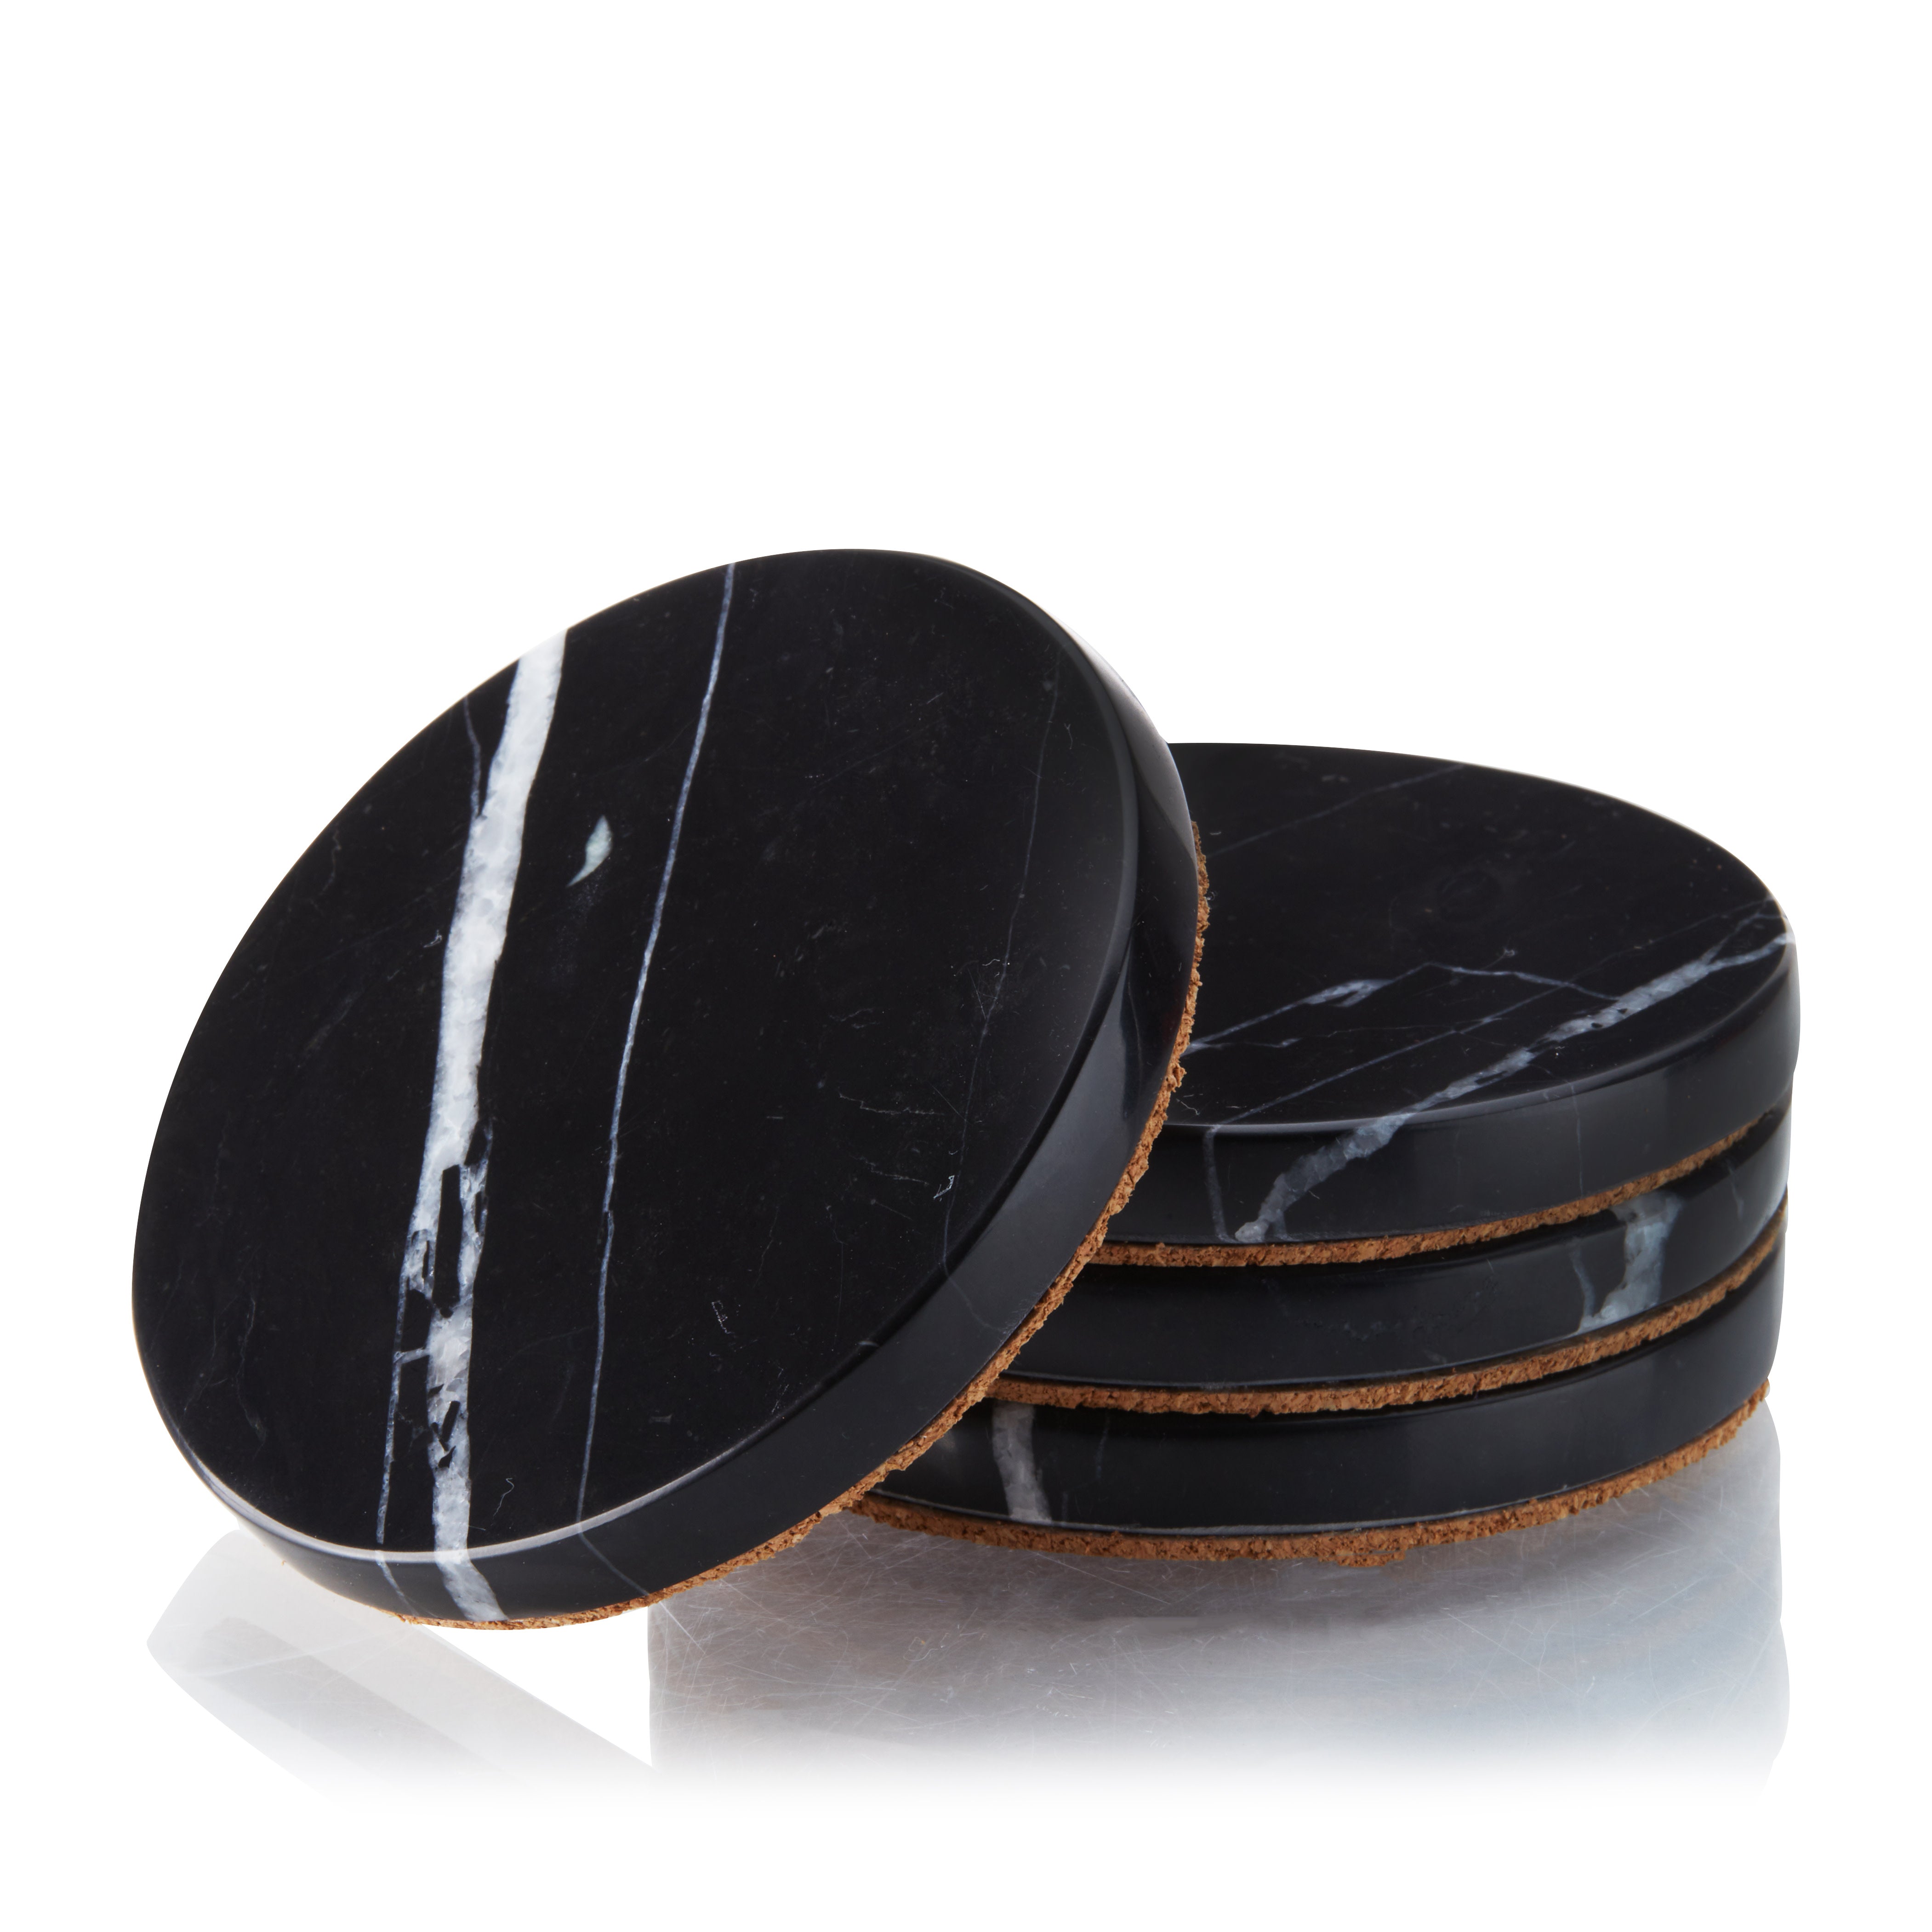 Viski Black Marble Coasters - Round Black Coasters for Drinks - Heavy Stone  with Cork Backing and Stand - Real Black Marble Coasters Set of 4